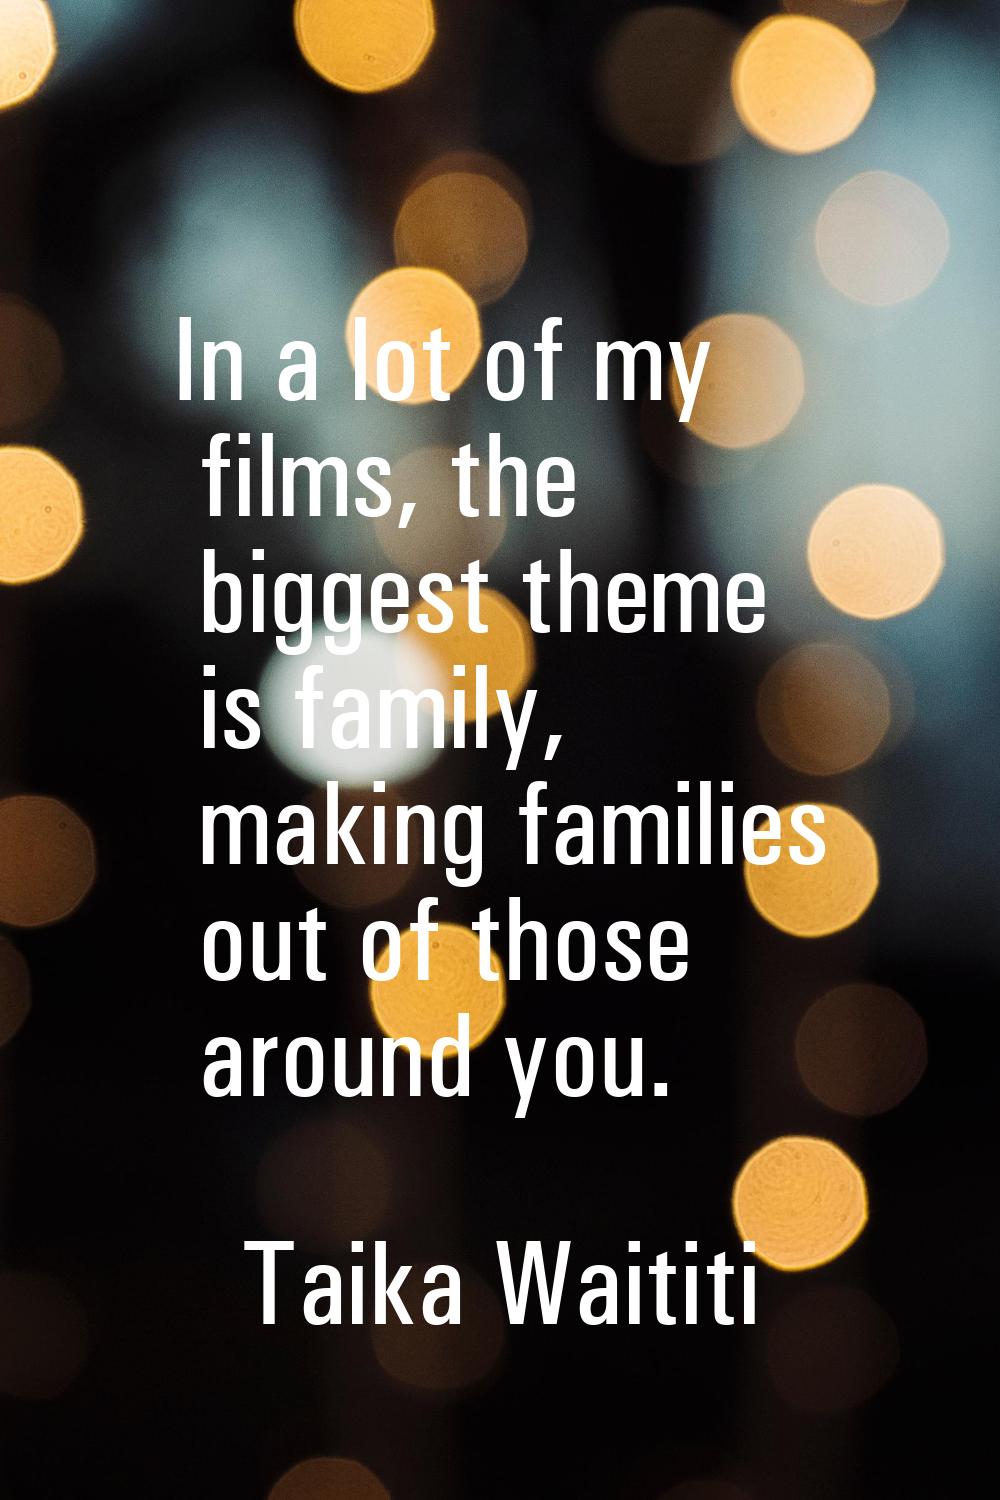 In a lot of my films, the biggest theme is family, making families out of those around you.